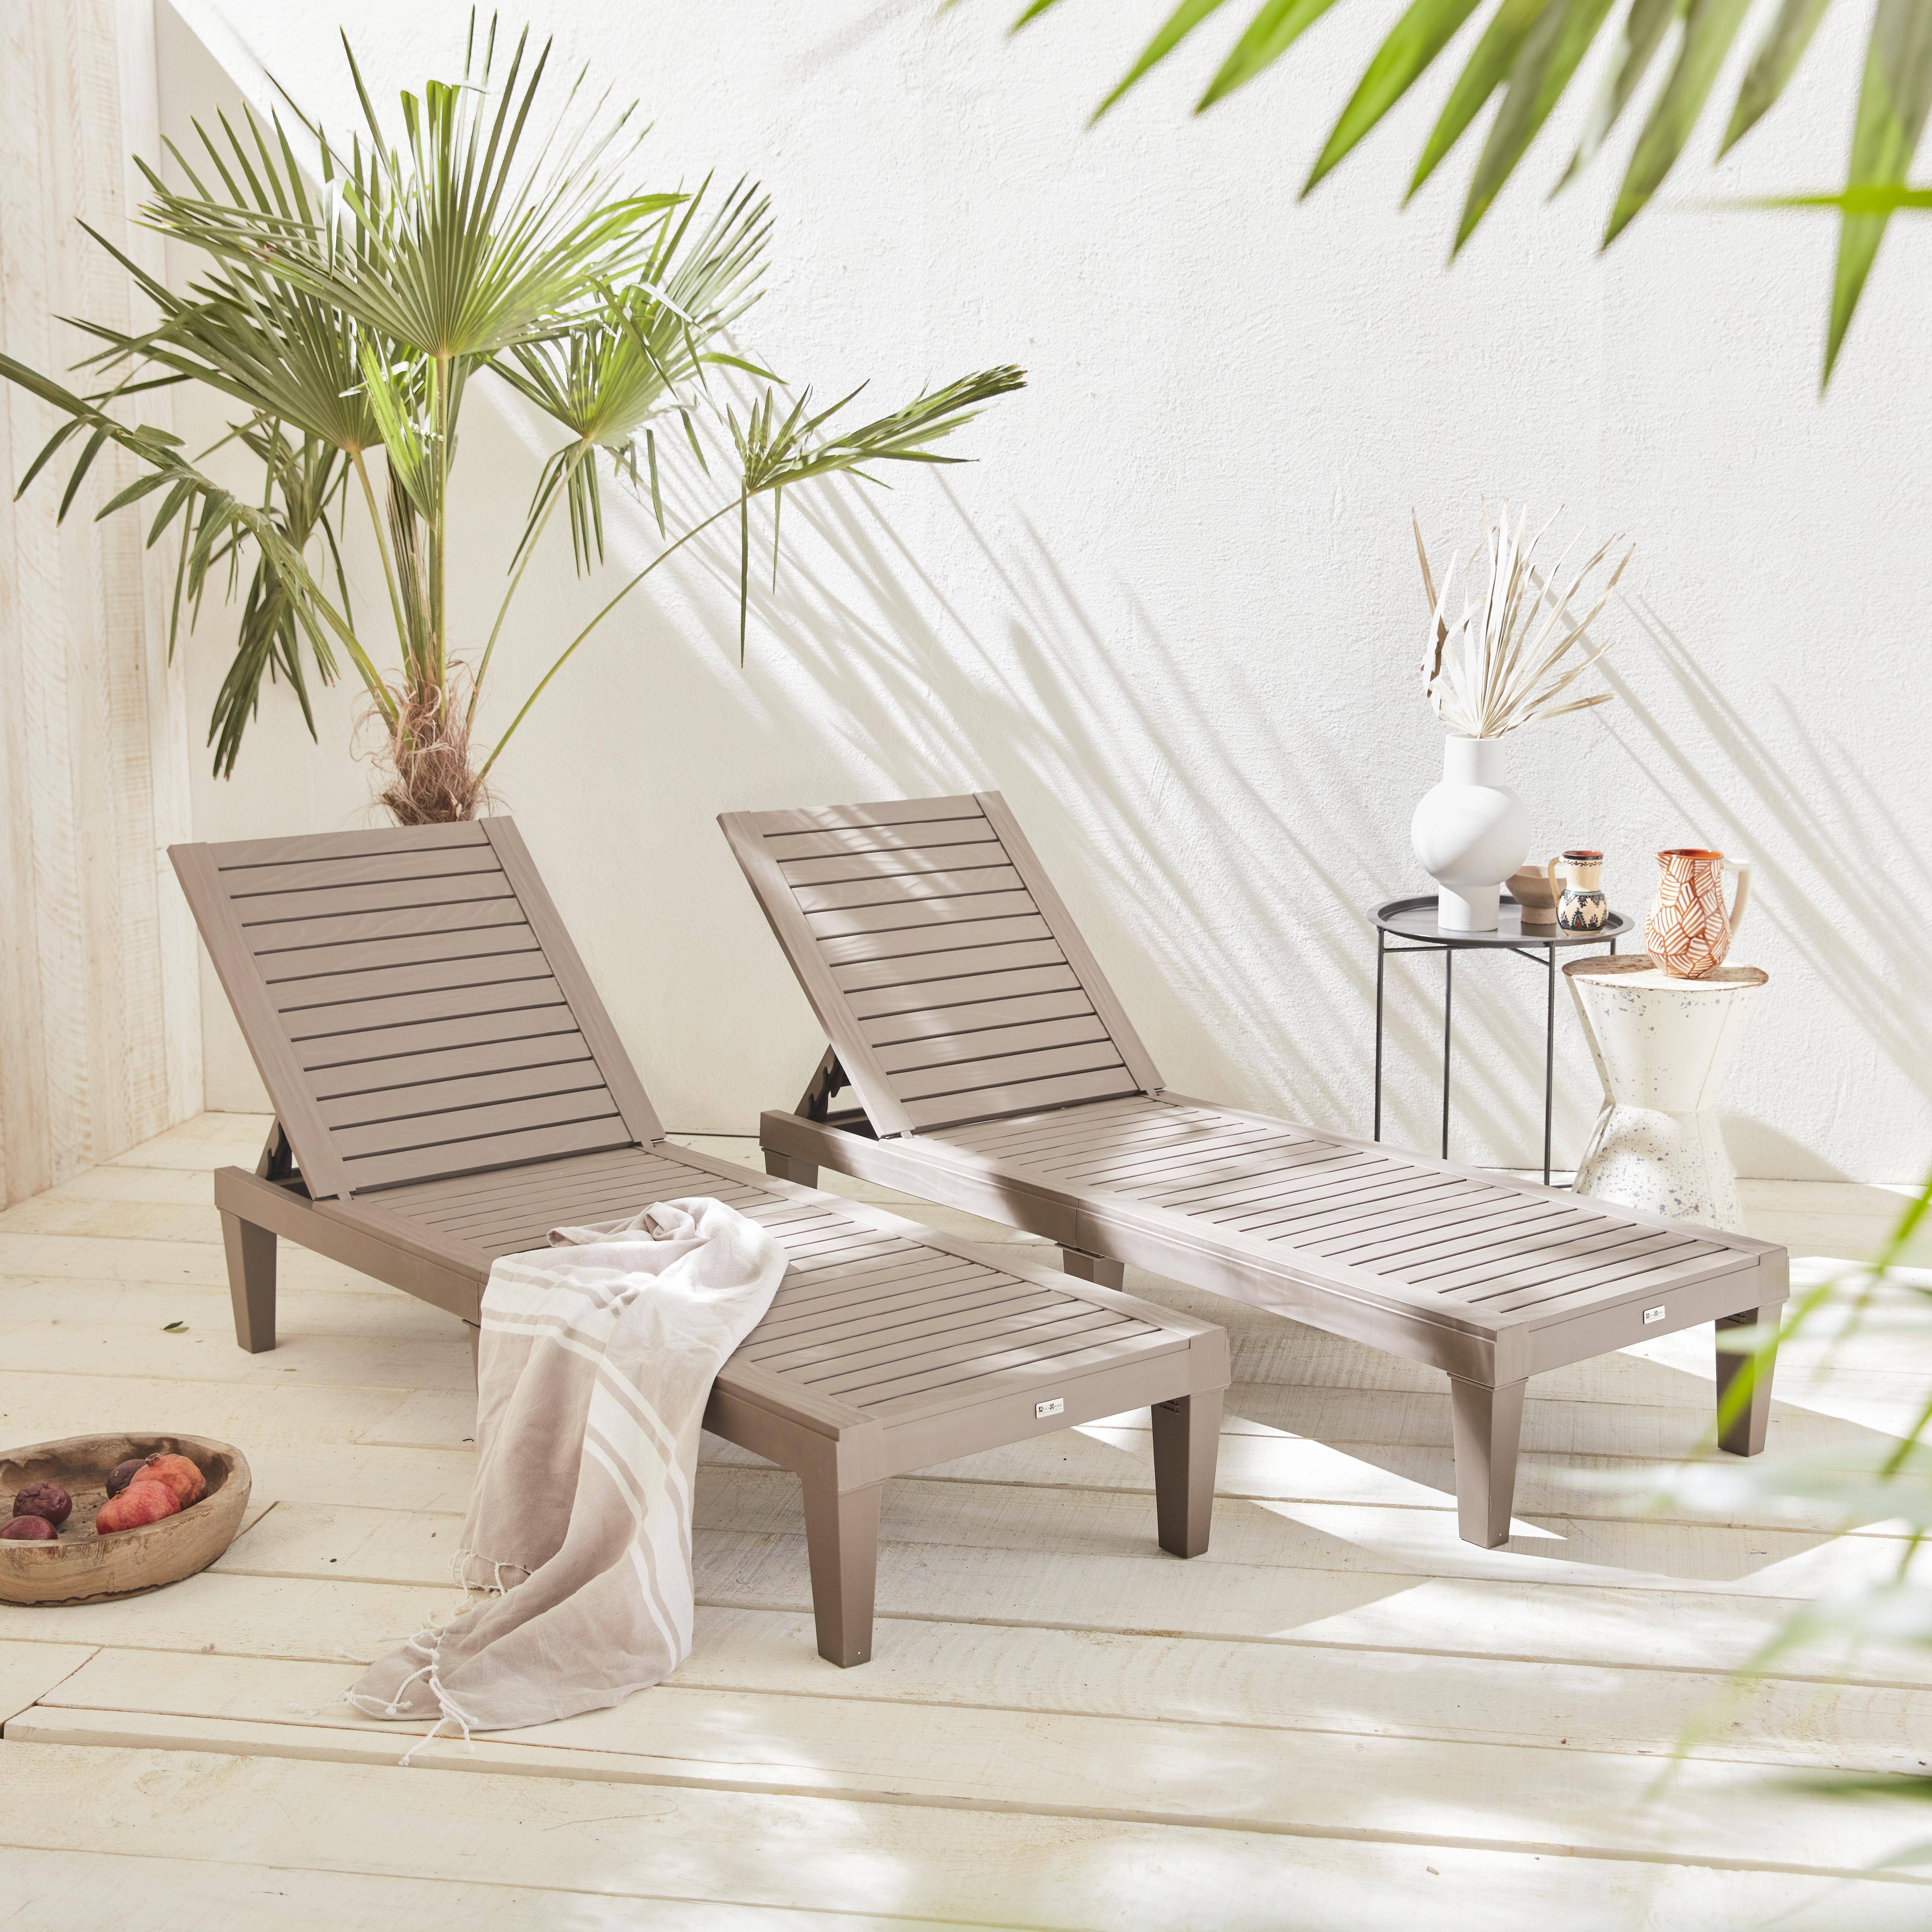 Pair of plastic loungers, multi position sun beds with textured wood effect - Pia - Grey Photo1